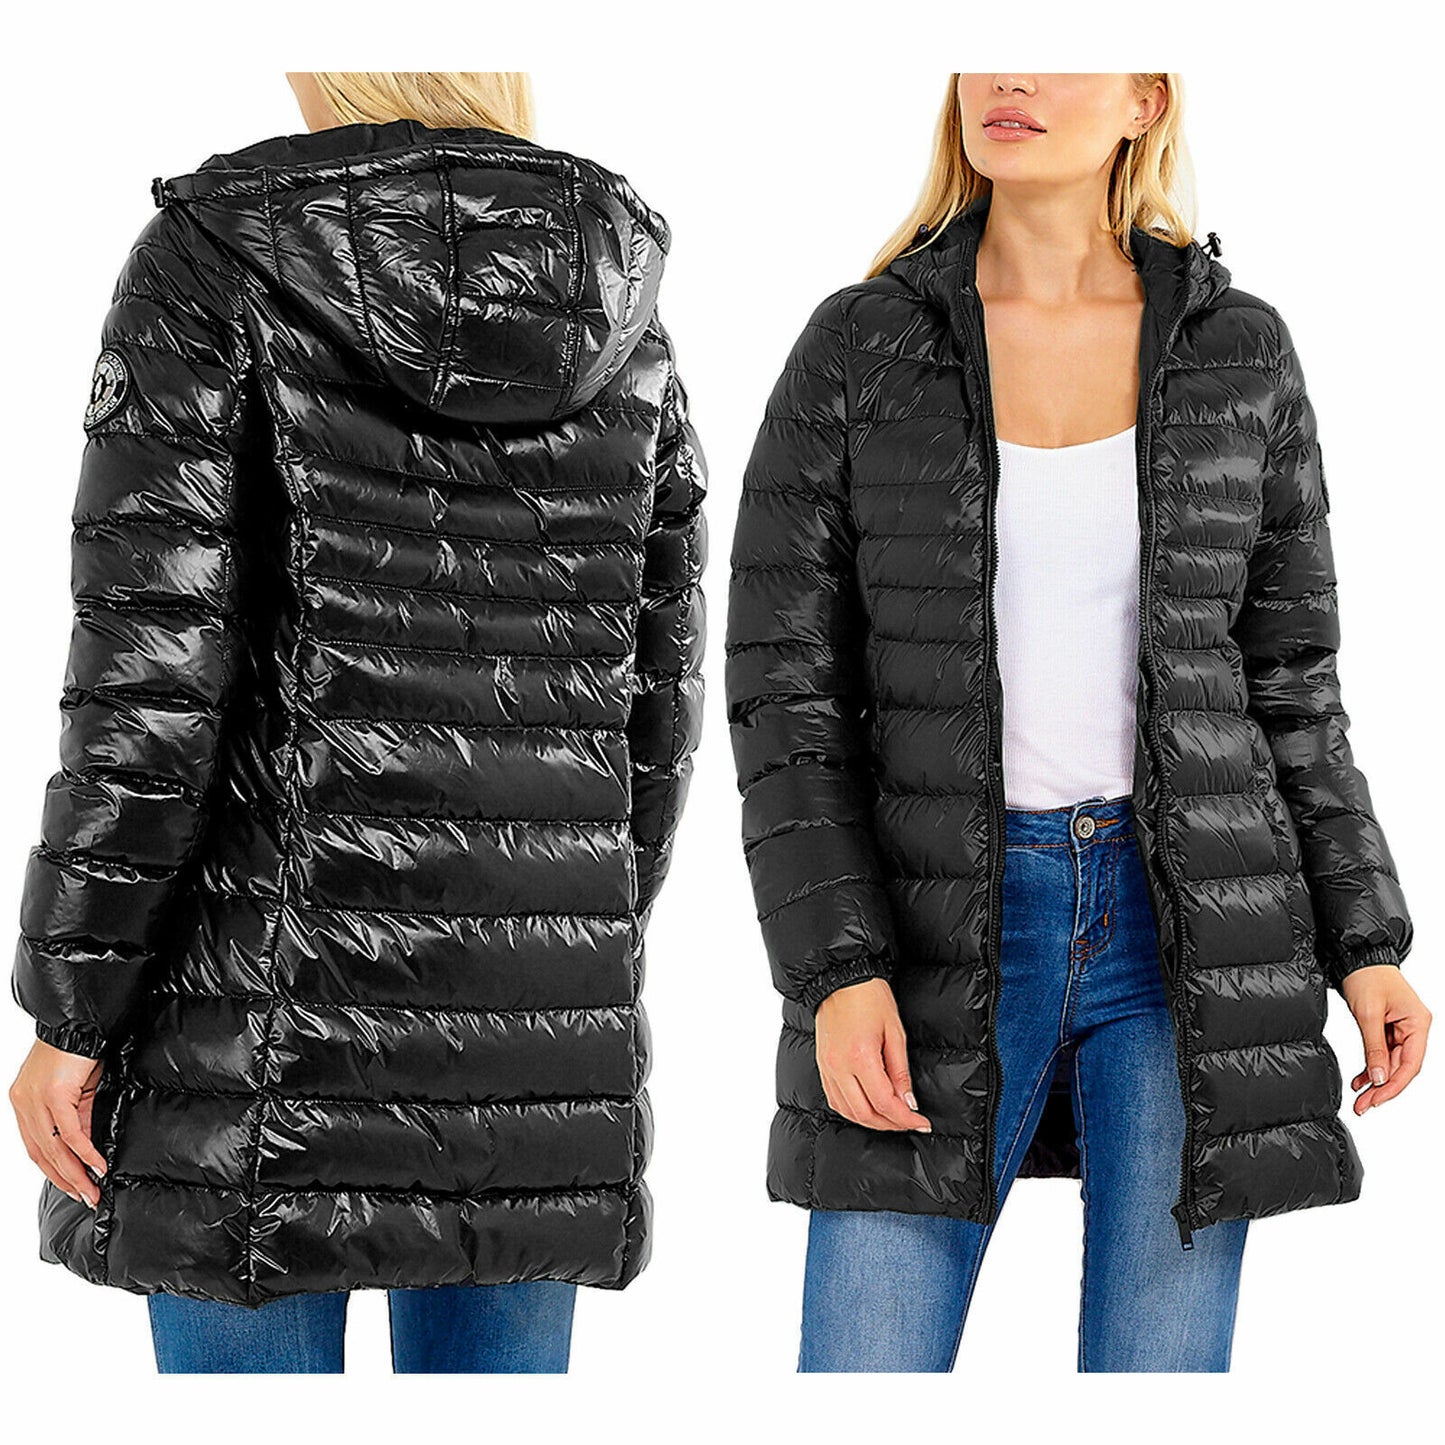 BRAVE SOUL LADIES PADDED PUFFER HOOD JACKET THICK WINTER WARM CASUAL OUTDOOR TOP